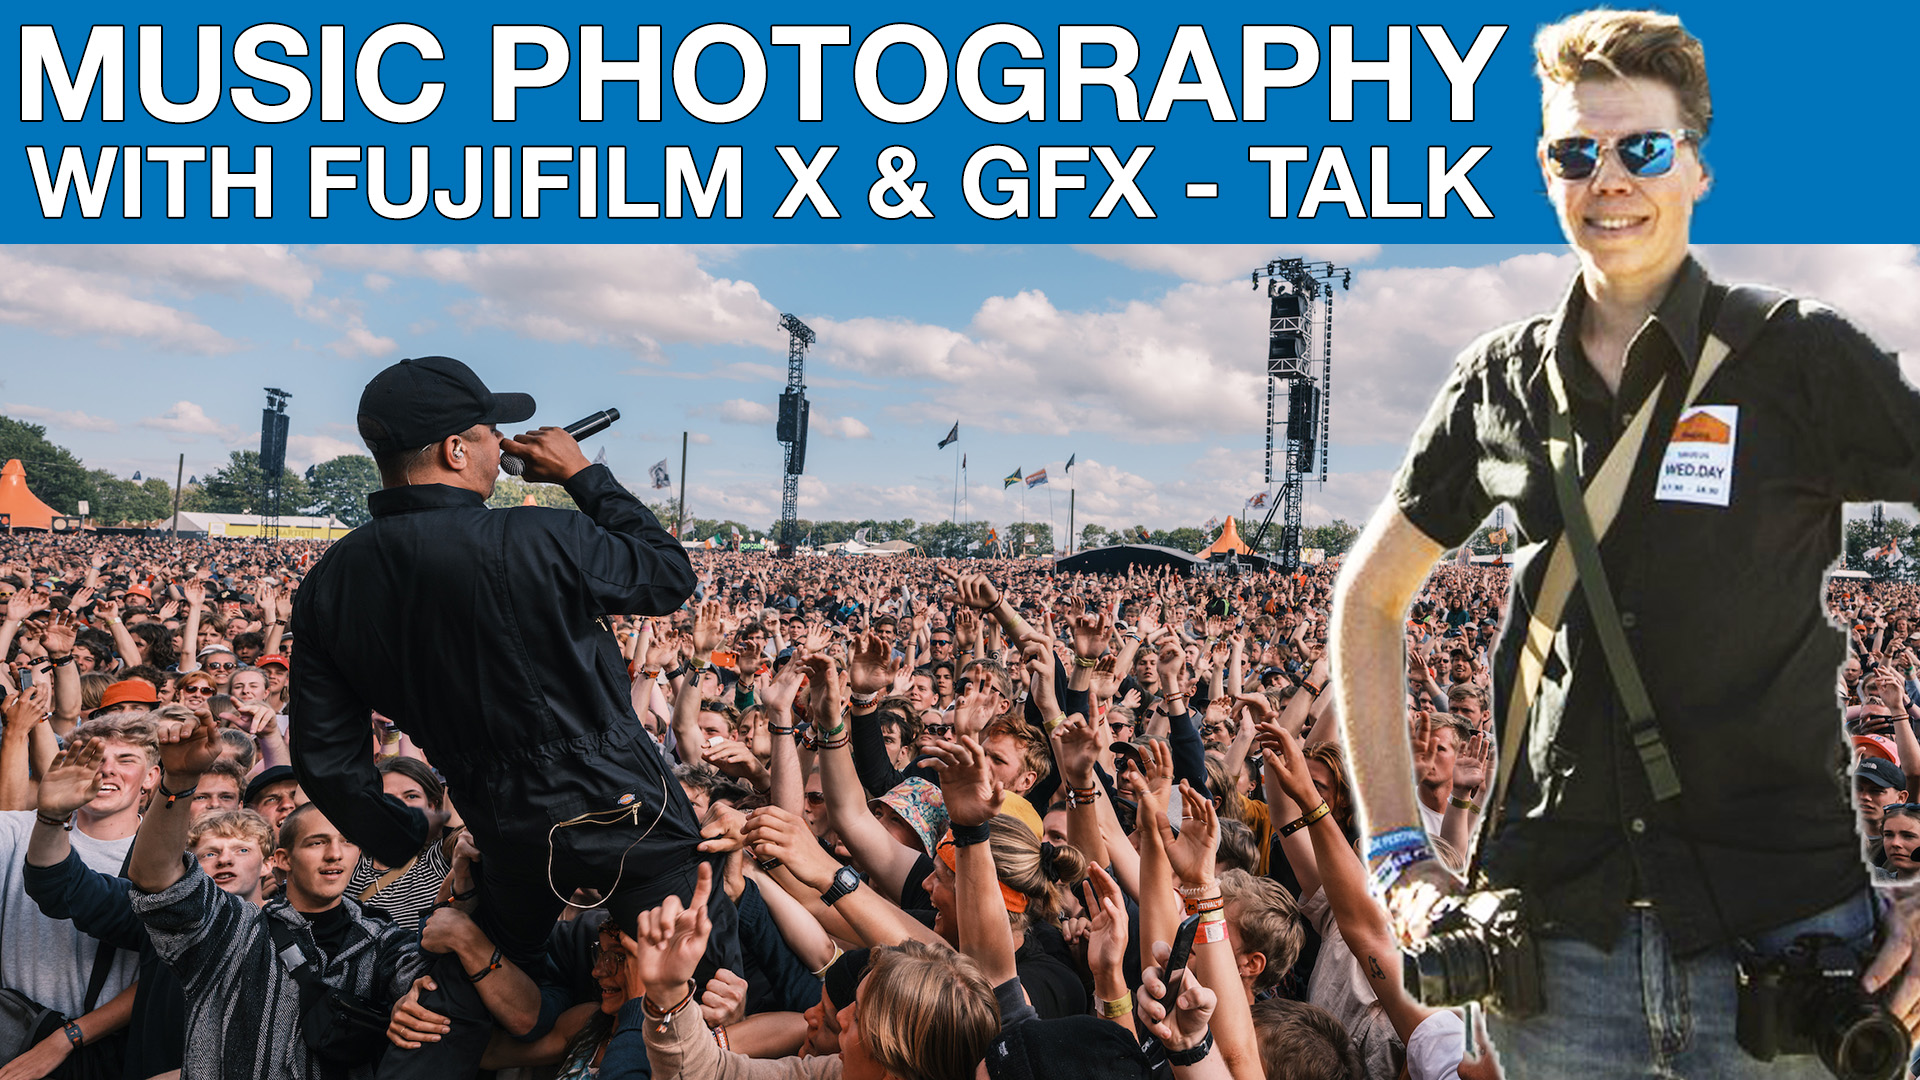 Featured image for “Webinar talk: Music photography with FUJIFILM X & GFX cameras”